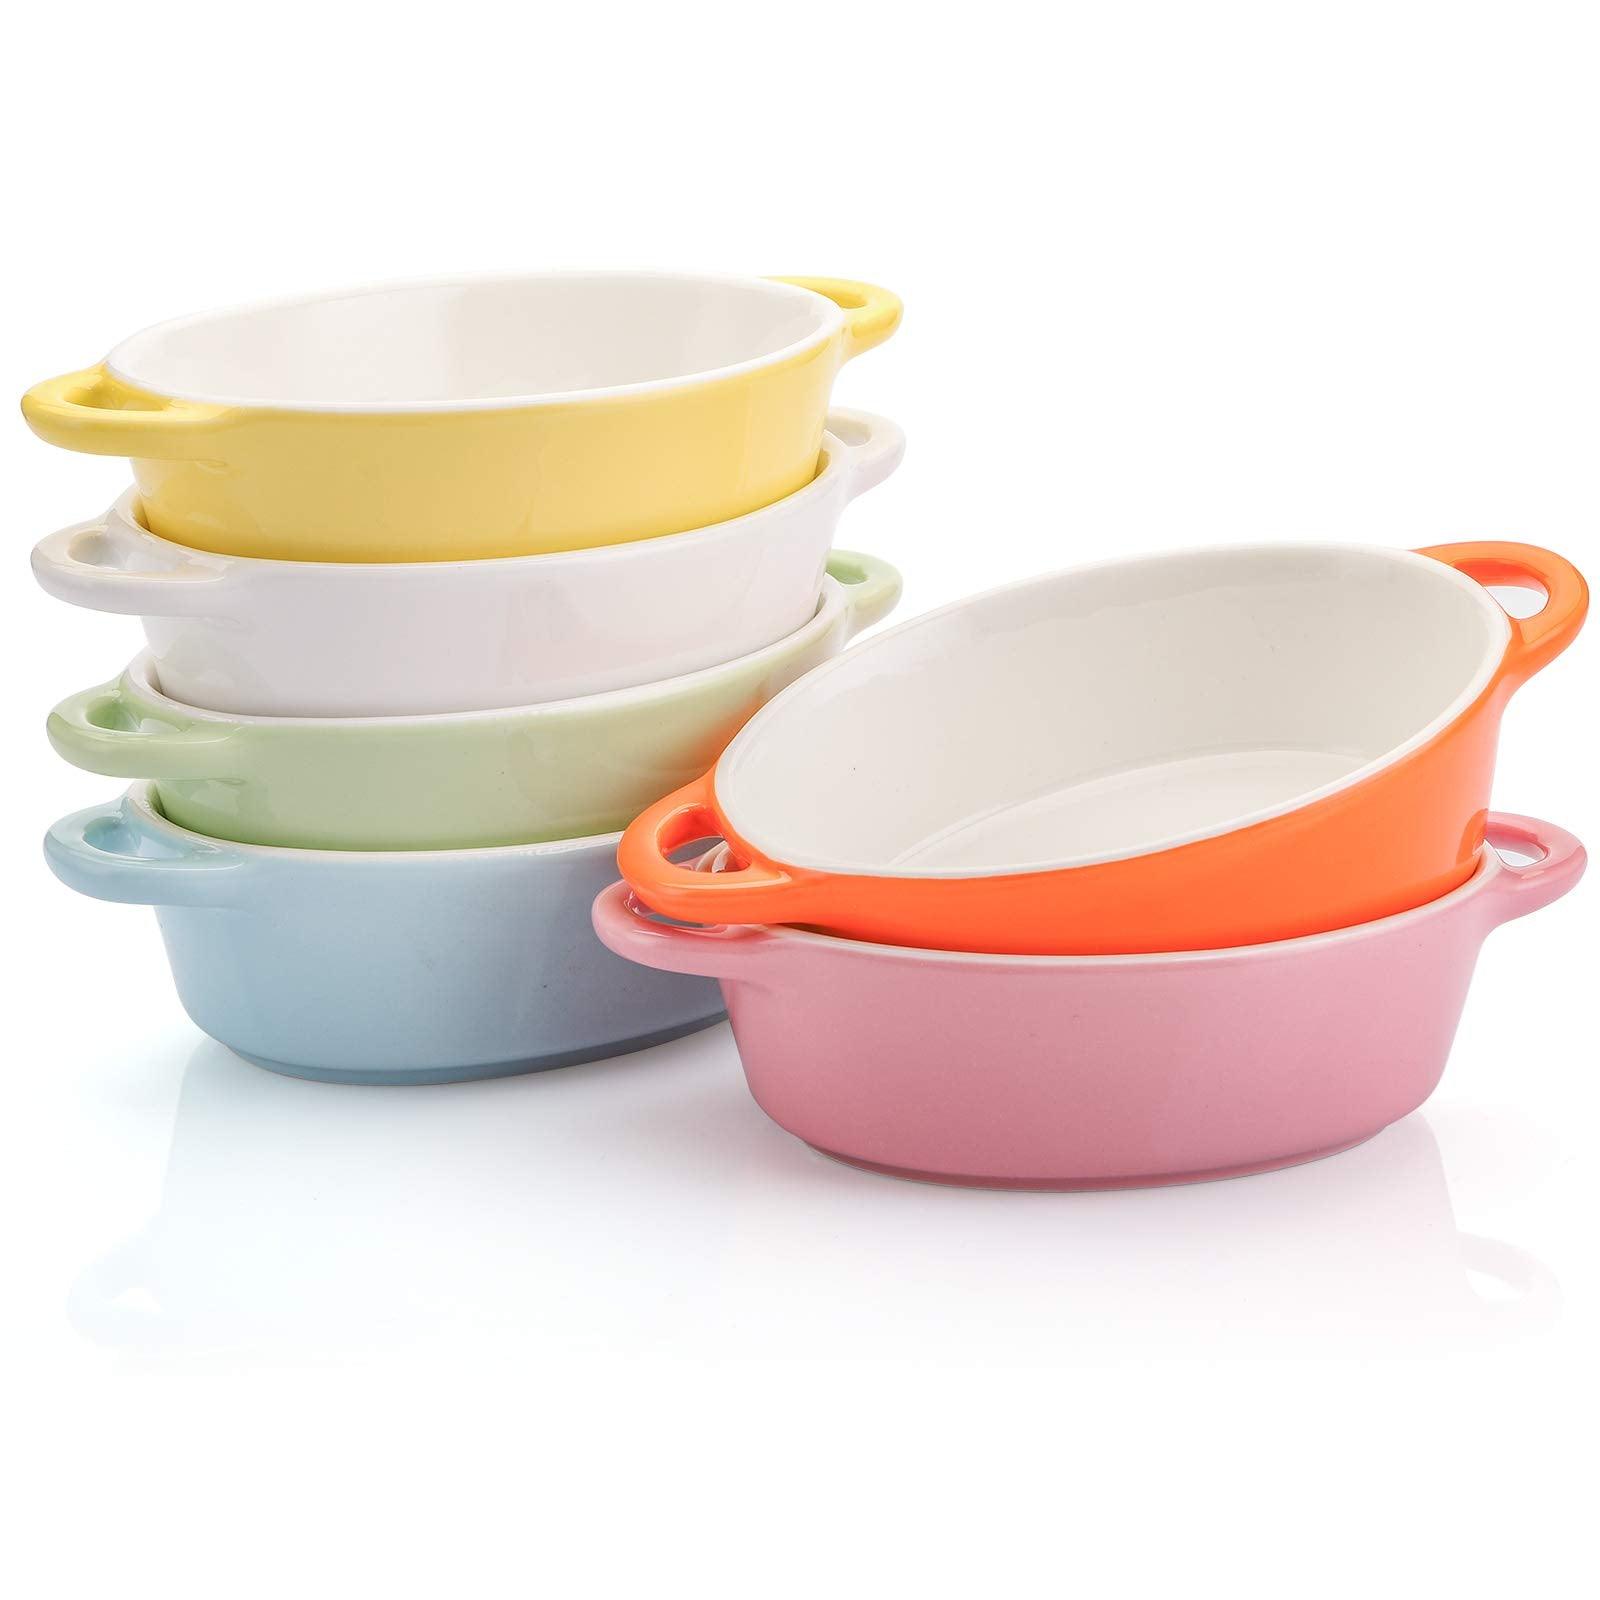 Foraineam 6 Colors Oval Porcelain Ramekins 10 oz Oven Safe Creme Brulee Souffle Baking Ramekin Dishes Bowl with Double Handles - CookCave